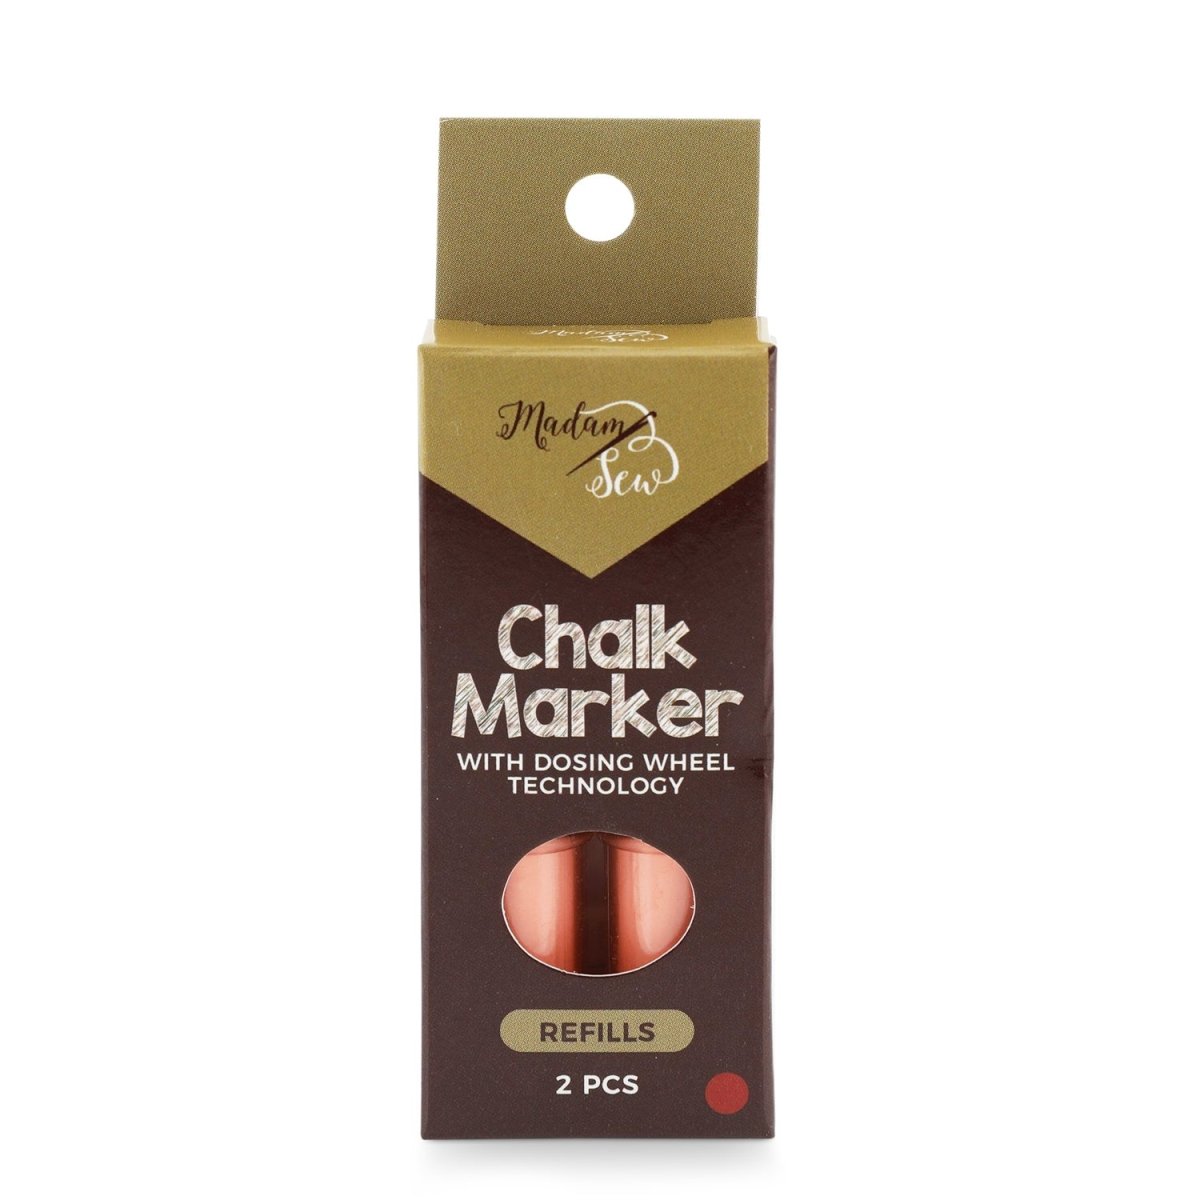 red refills in a box for Madam Sew chalk markers